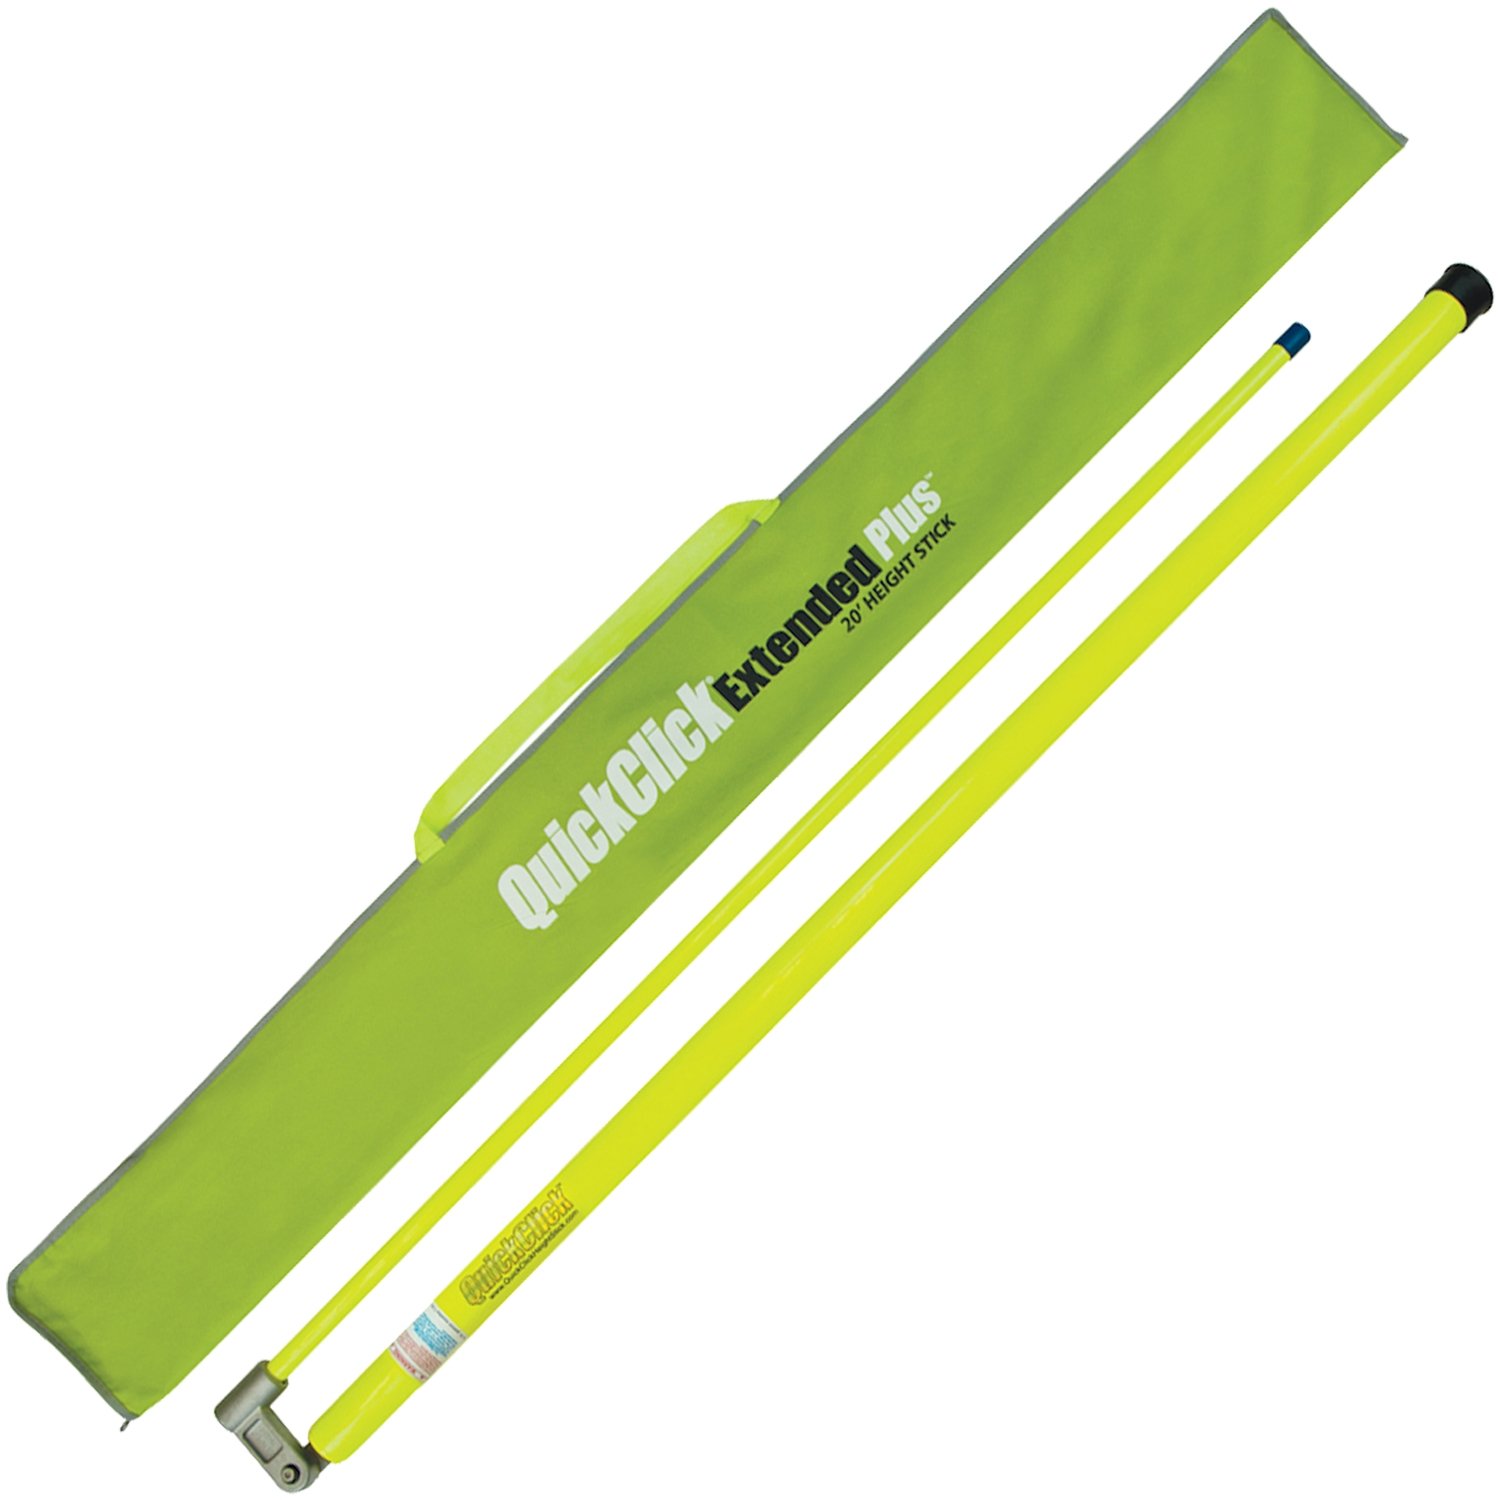 QuickClick Compact Plus Load Height Measuring Stick Up To 15' 